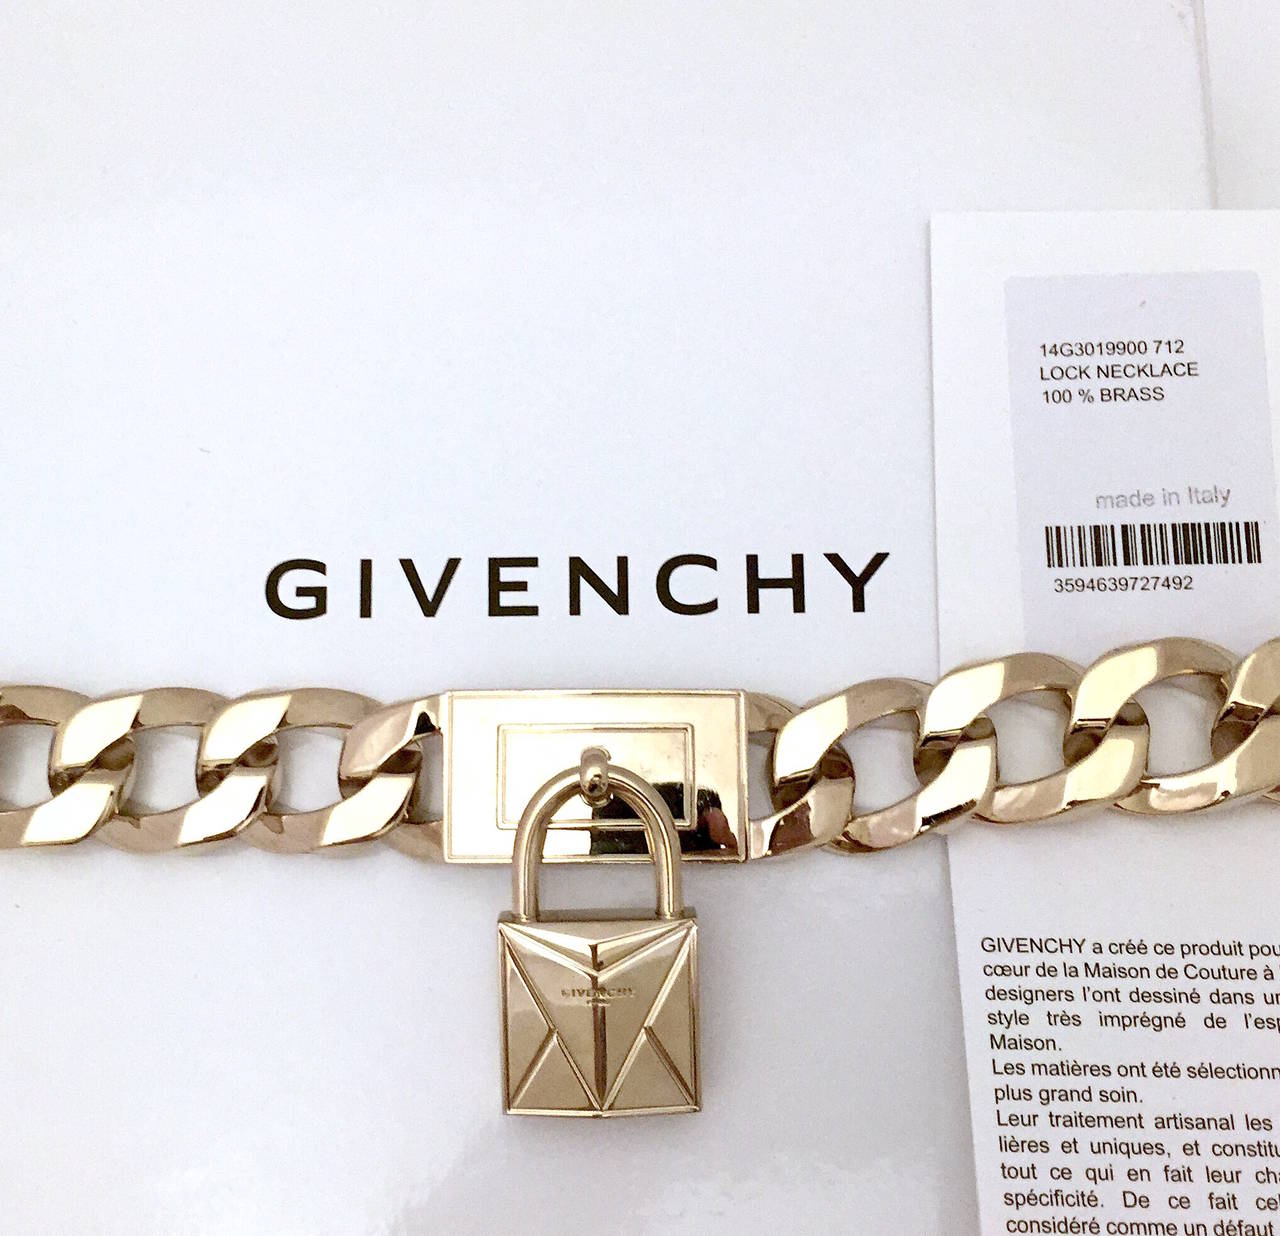 Givenchy pale gold-tone plated brass curb chain choker with padlock pendant and push-lock closure. Includes original box and dust bag.

Measurements: 
Necklace 15.5